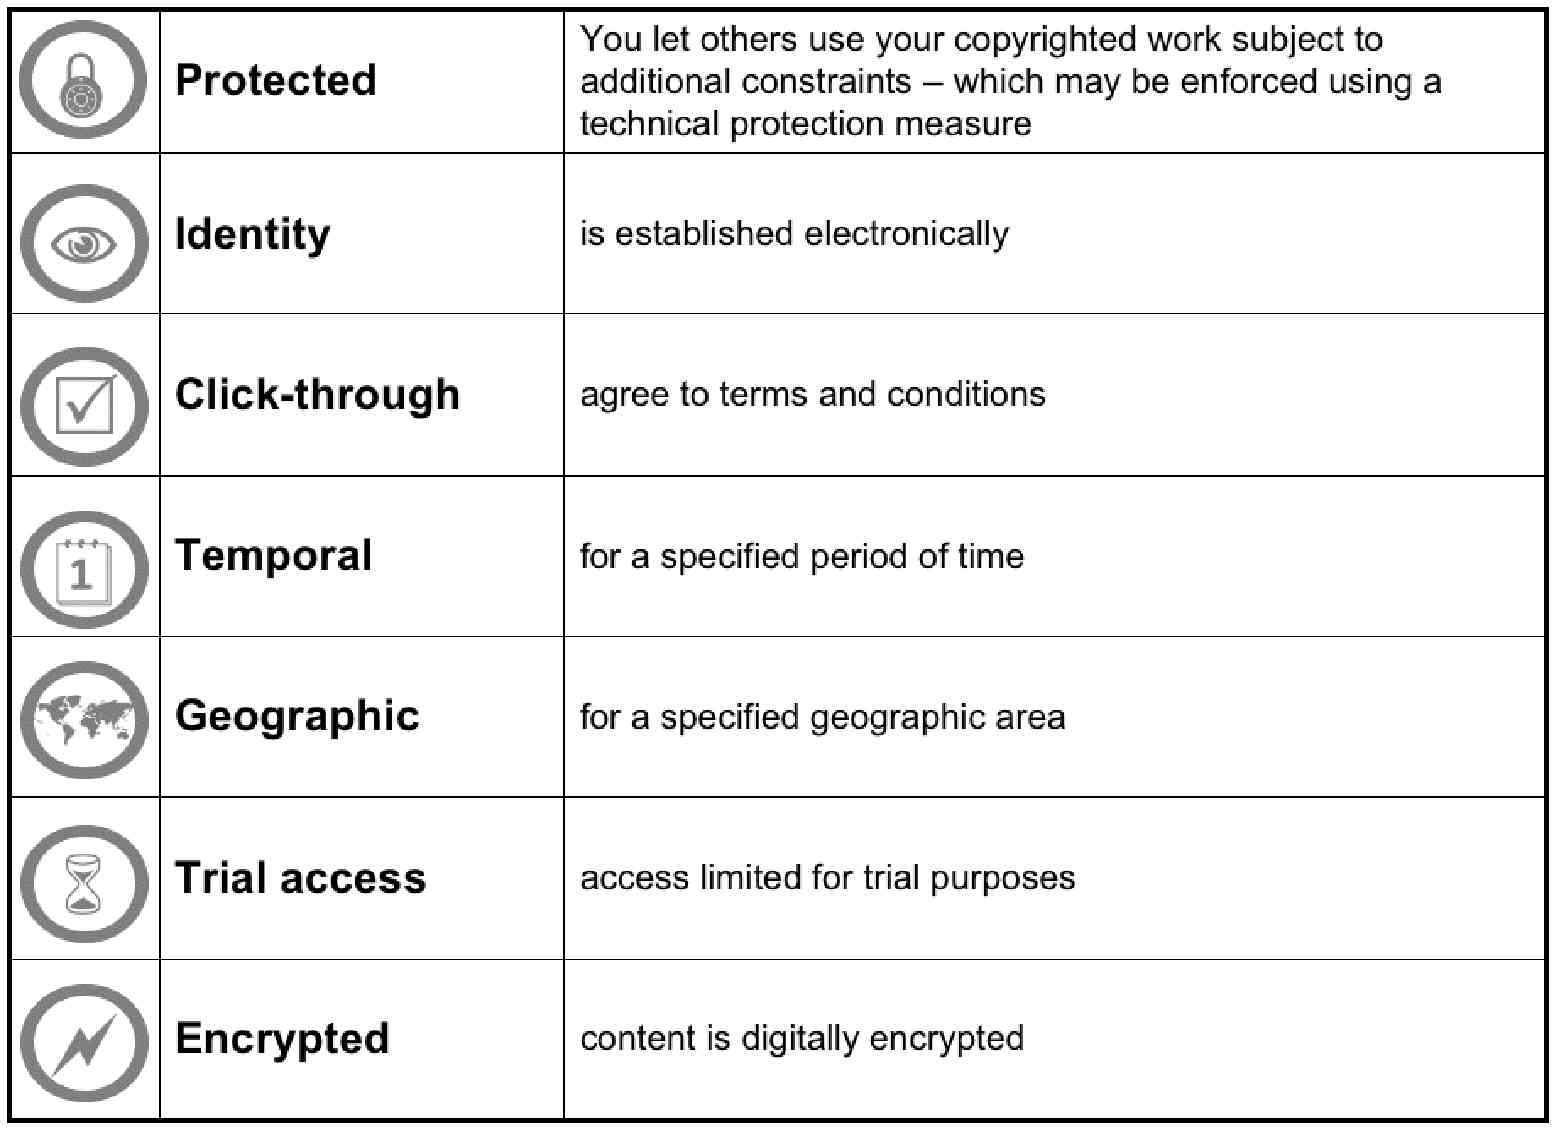 Table showing list of issues needing to be addressed in the digital locks and keys of rights management.